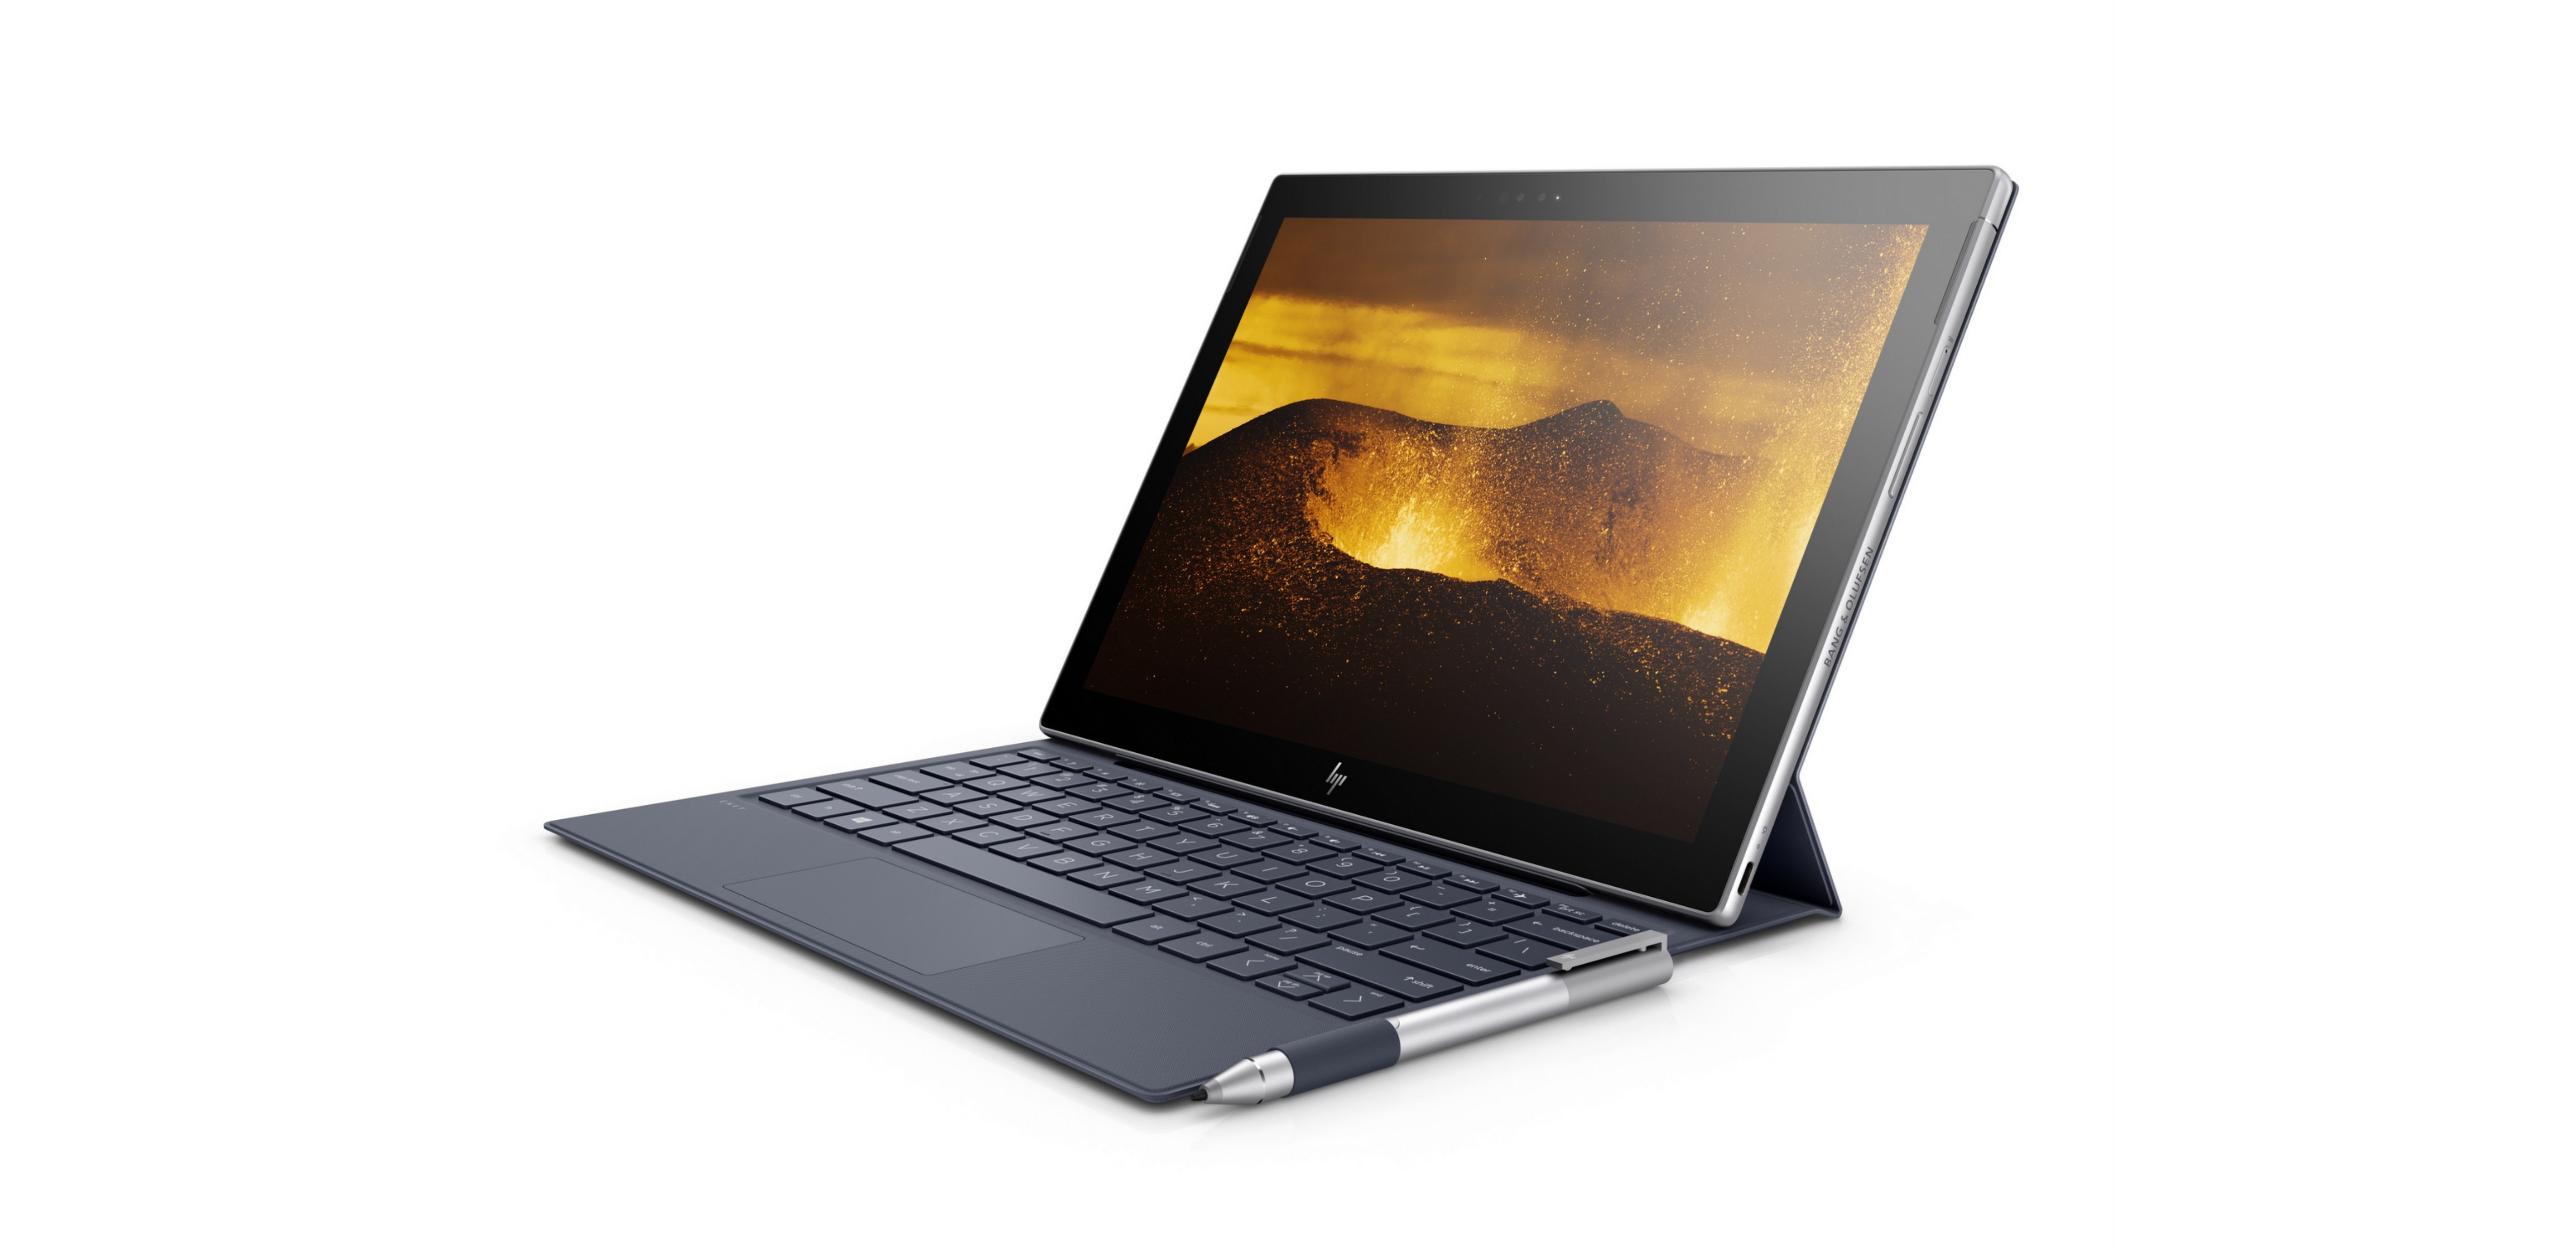 HP ENVY x2 shown in angle view with keyboard and pen attached.